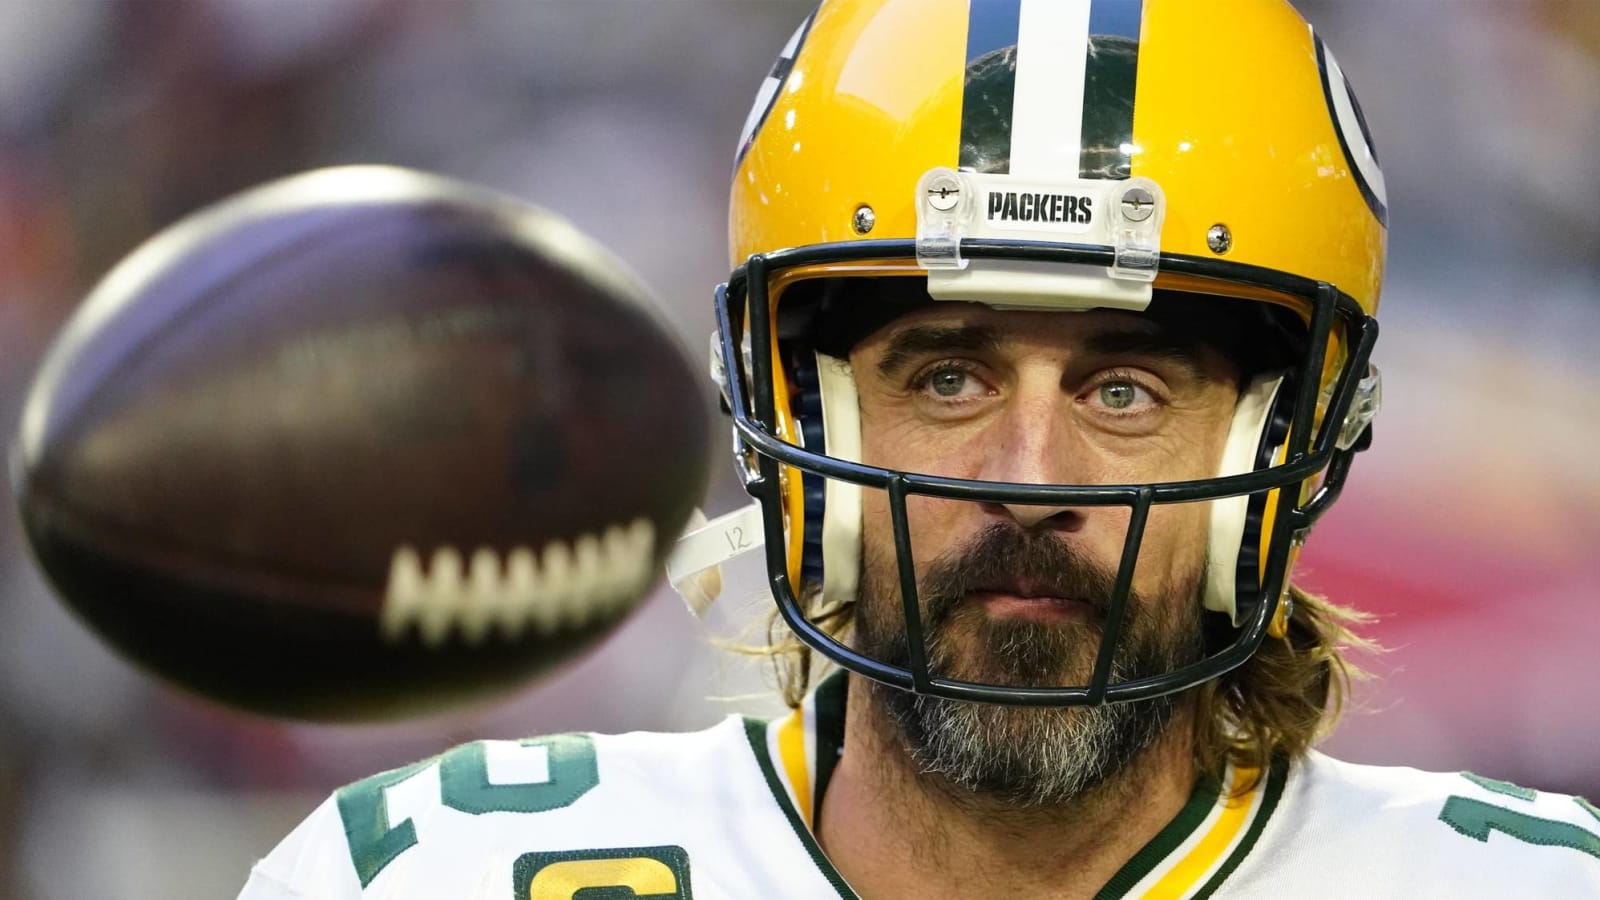 Aaron Rodgers offers explanation for not getting COVID vaccine